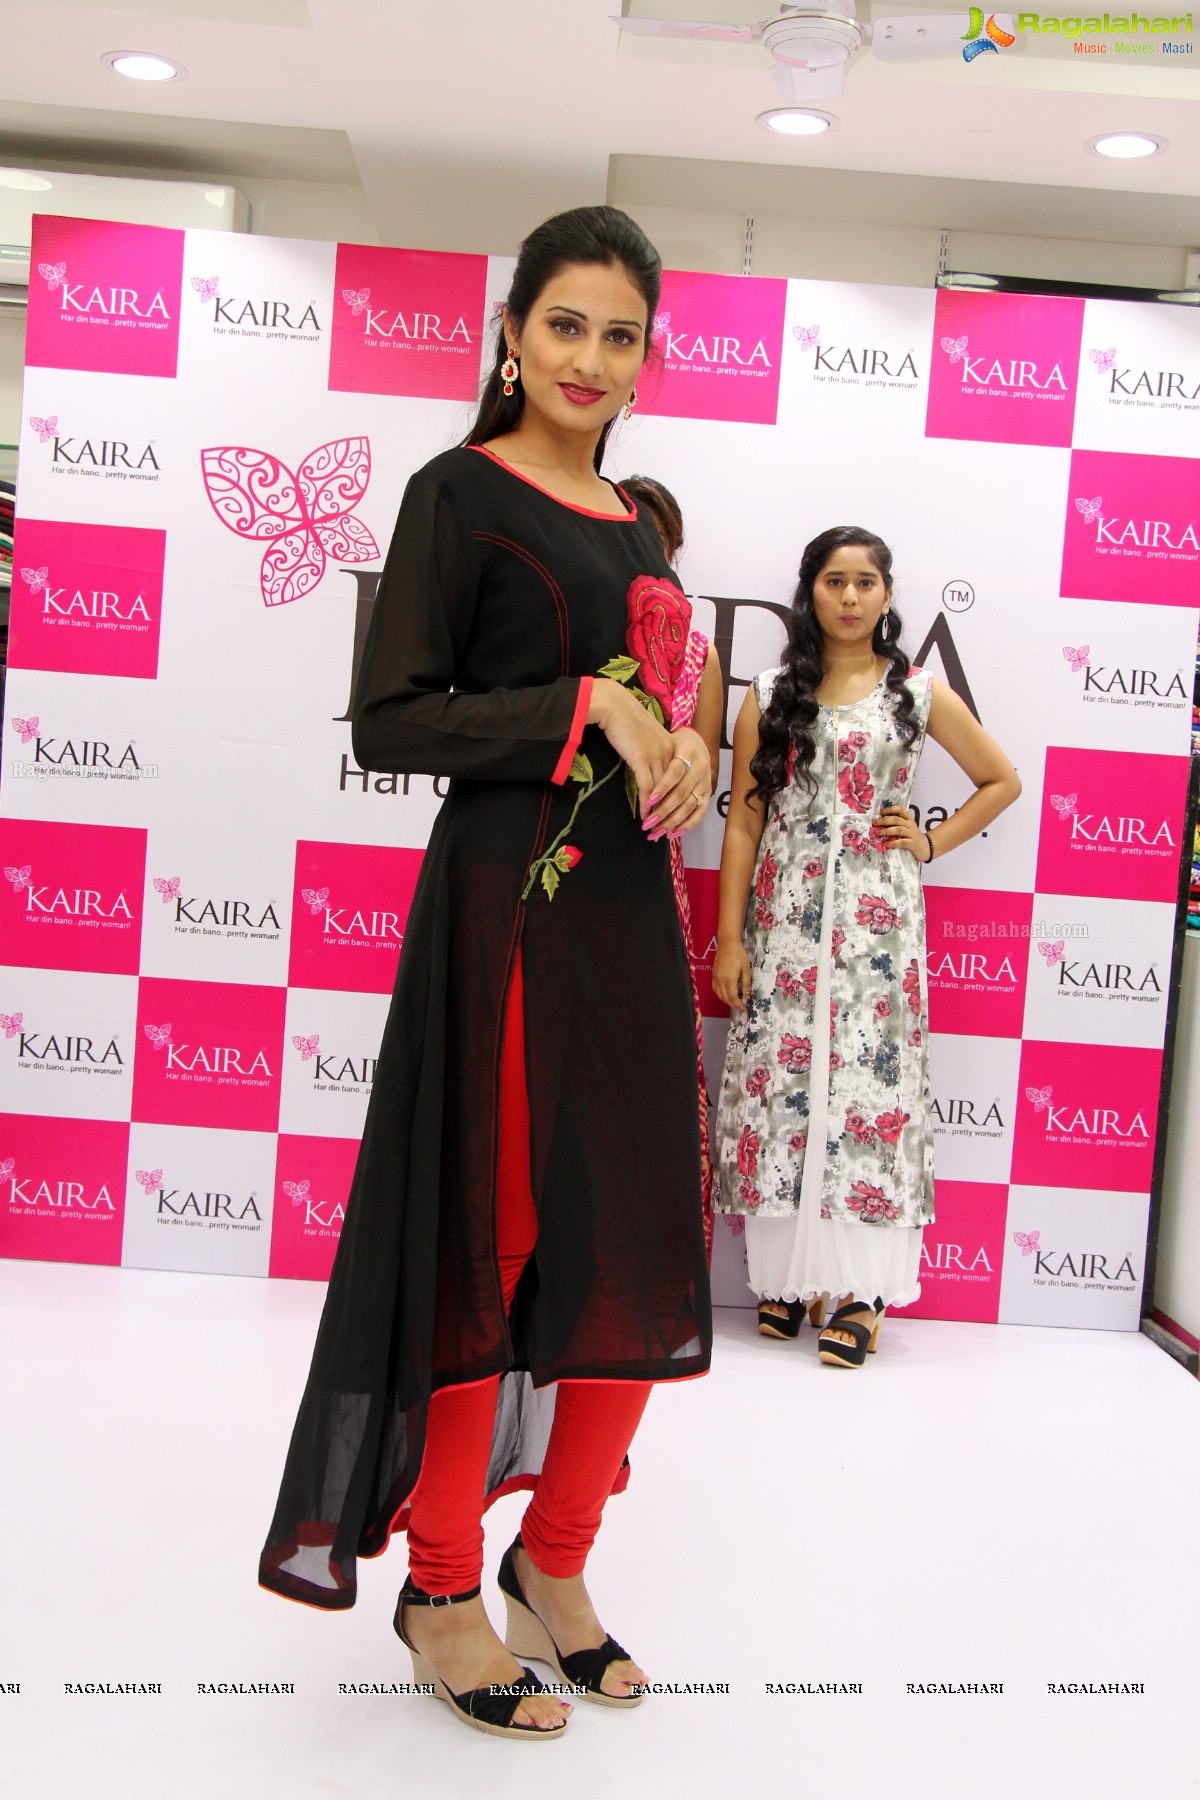 Kaira Fashion Show and Launch of All India Festive Season Special Collection